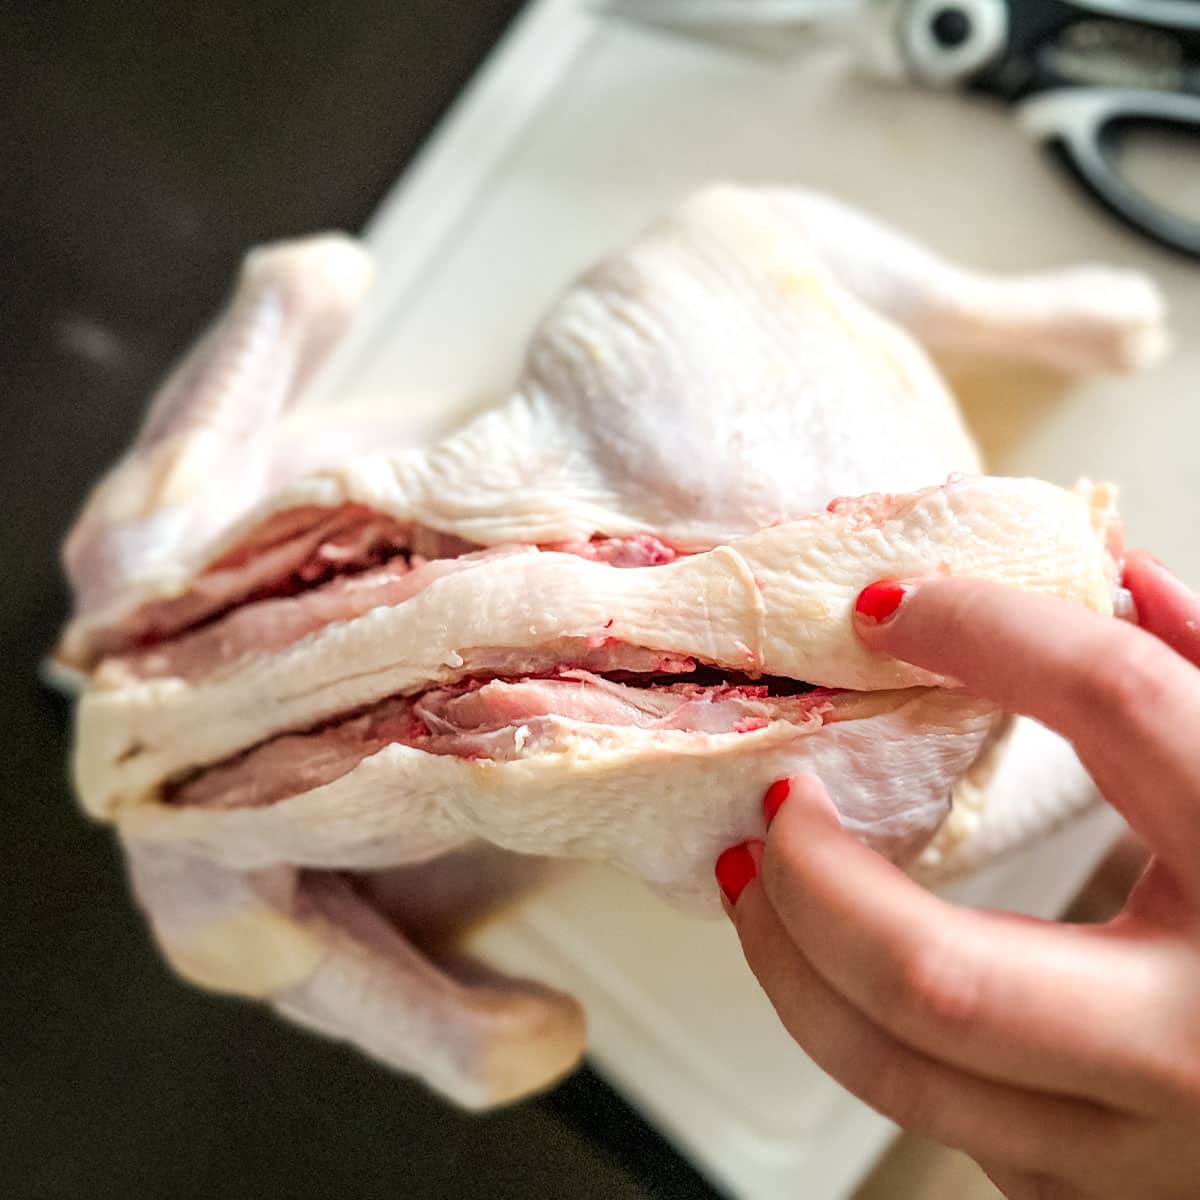 The backbone of a chicken is removed.